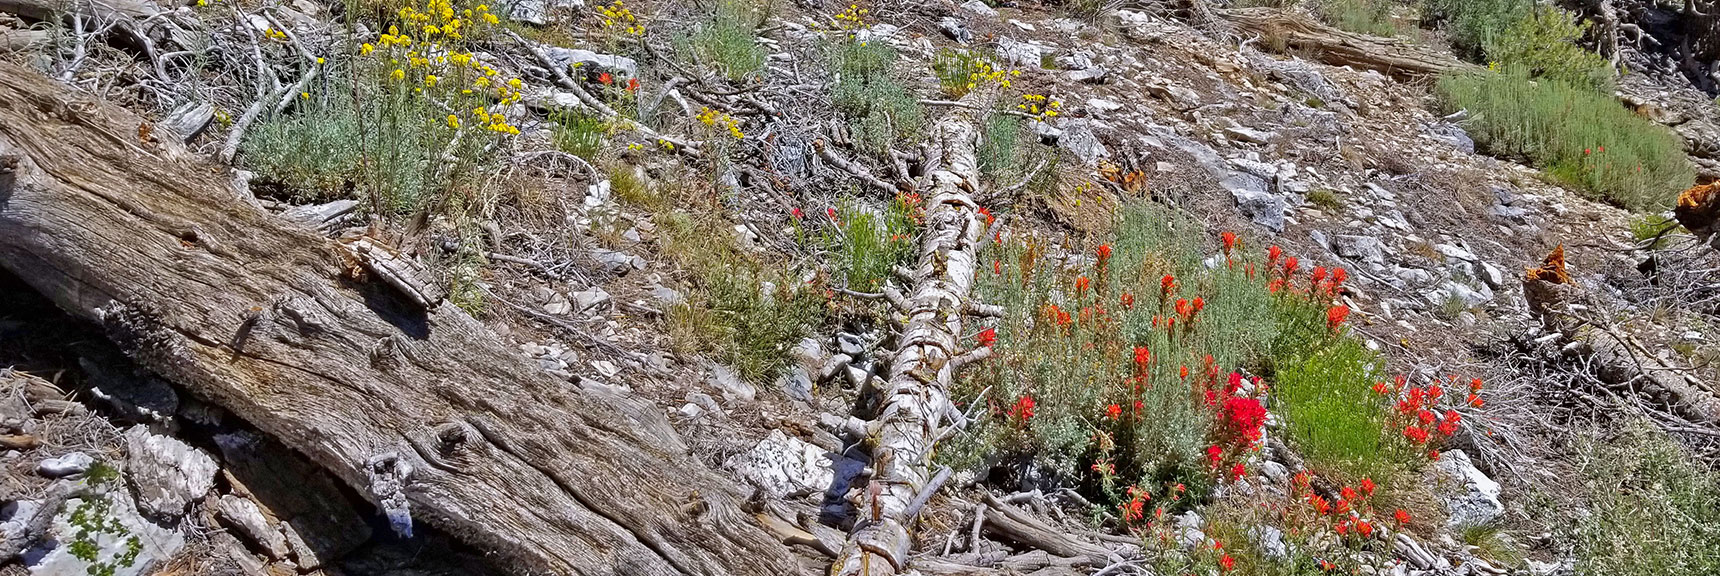 Wild Flowers Scattered Along the Approach Ridge | Black Rock Sister | Mt Charleston Wilderness | Lee Canyon | Spring Mountains, Nevada